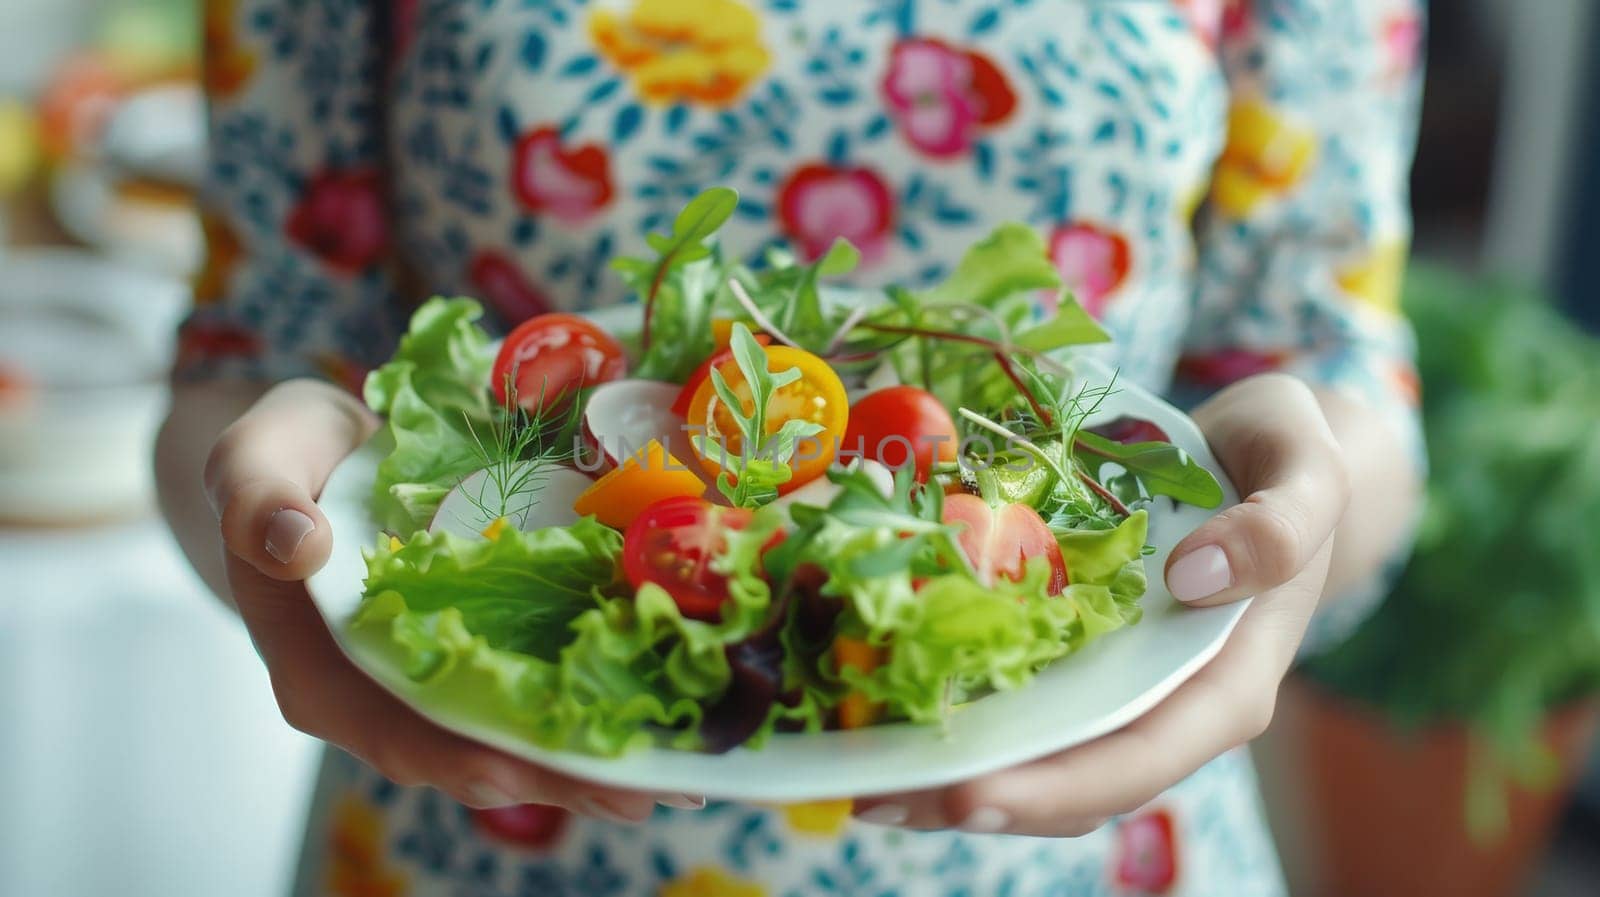 Woman's hands holding a bowl of vegetable salad, Hands with healthy eating theme by nijieimu